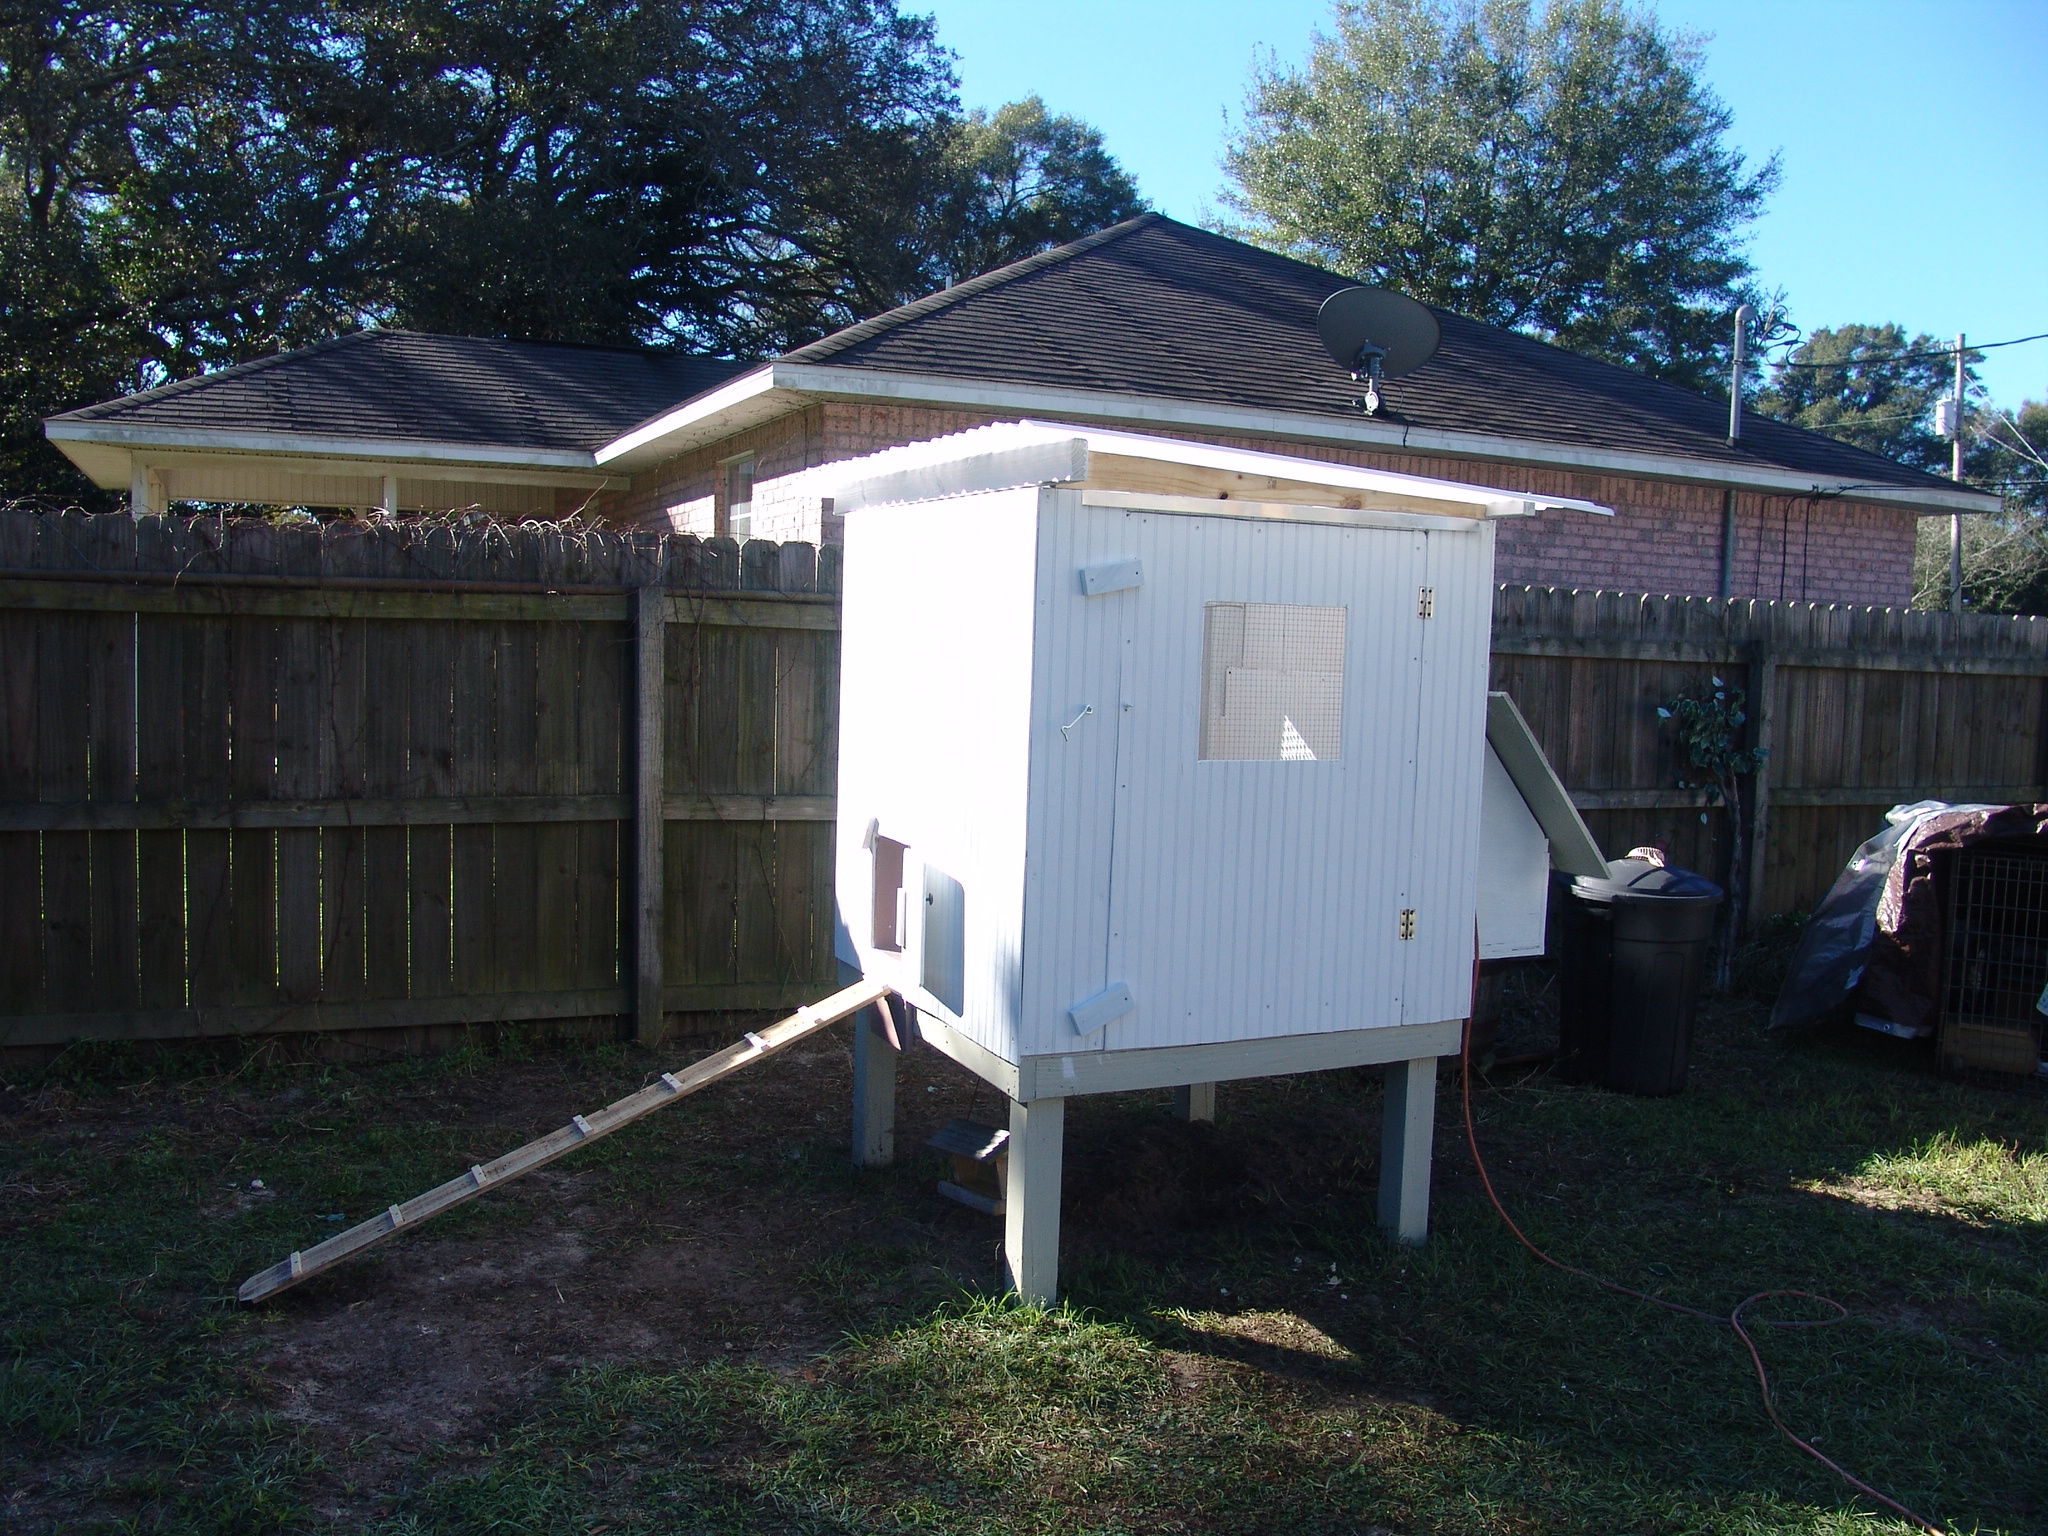 My finished coop its 4 x 4 x4 with a nest box and 24" off the ground.